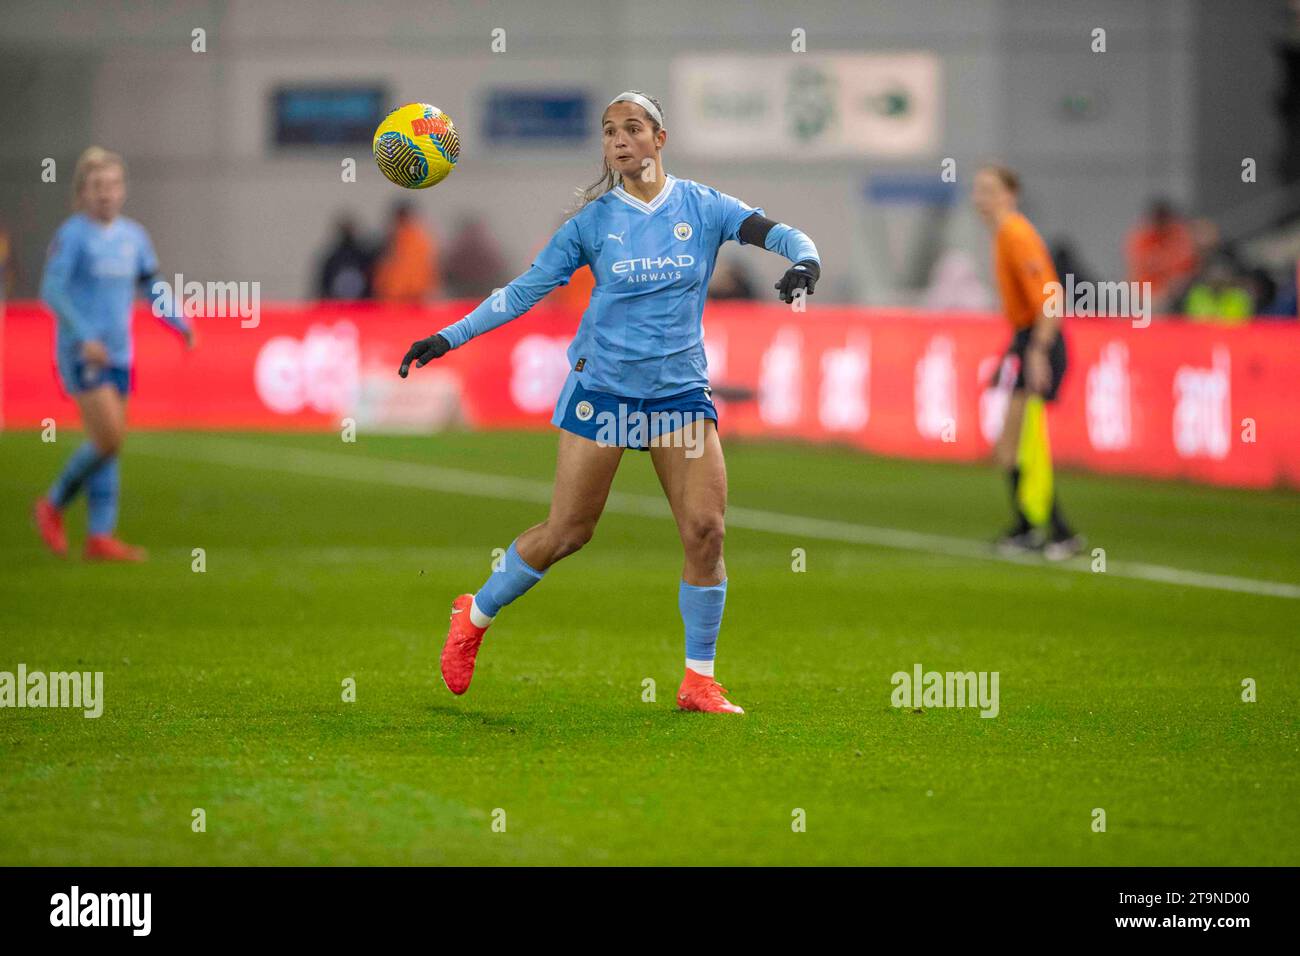 Manchester on Saturday 25th November 2023.Deyna Castellanos #10 of Manchester City chests the ball during the Barclays FA Women's Super League match between Manchester City and Tottenham Hotspur at the Joie Stadium, Manchester on Saturday 25th November 2023. (Photo: Mike Morese | MI News) Credit: MI News & Sport /Alamy Live News Stock Photo